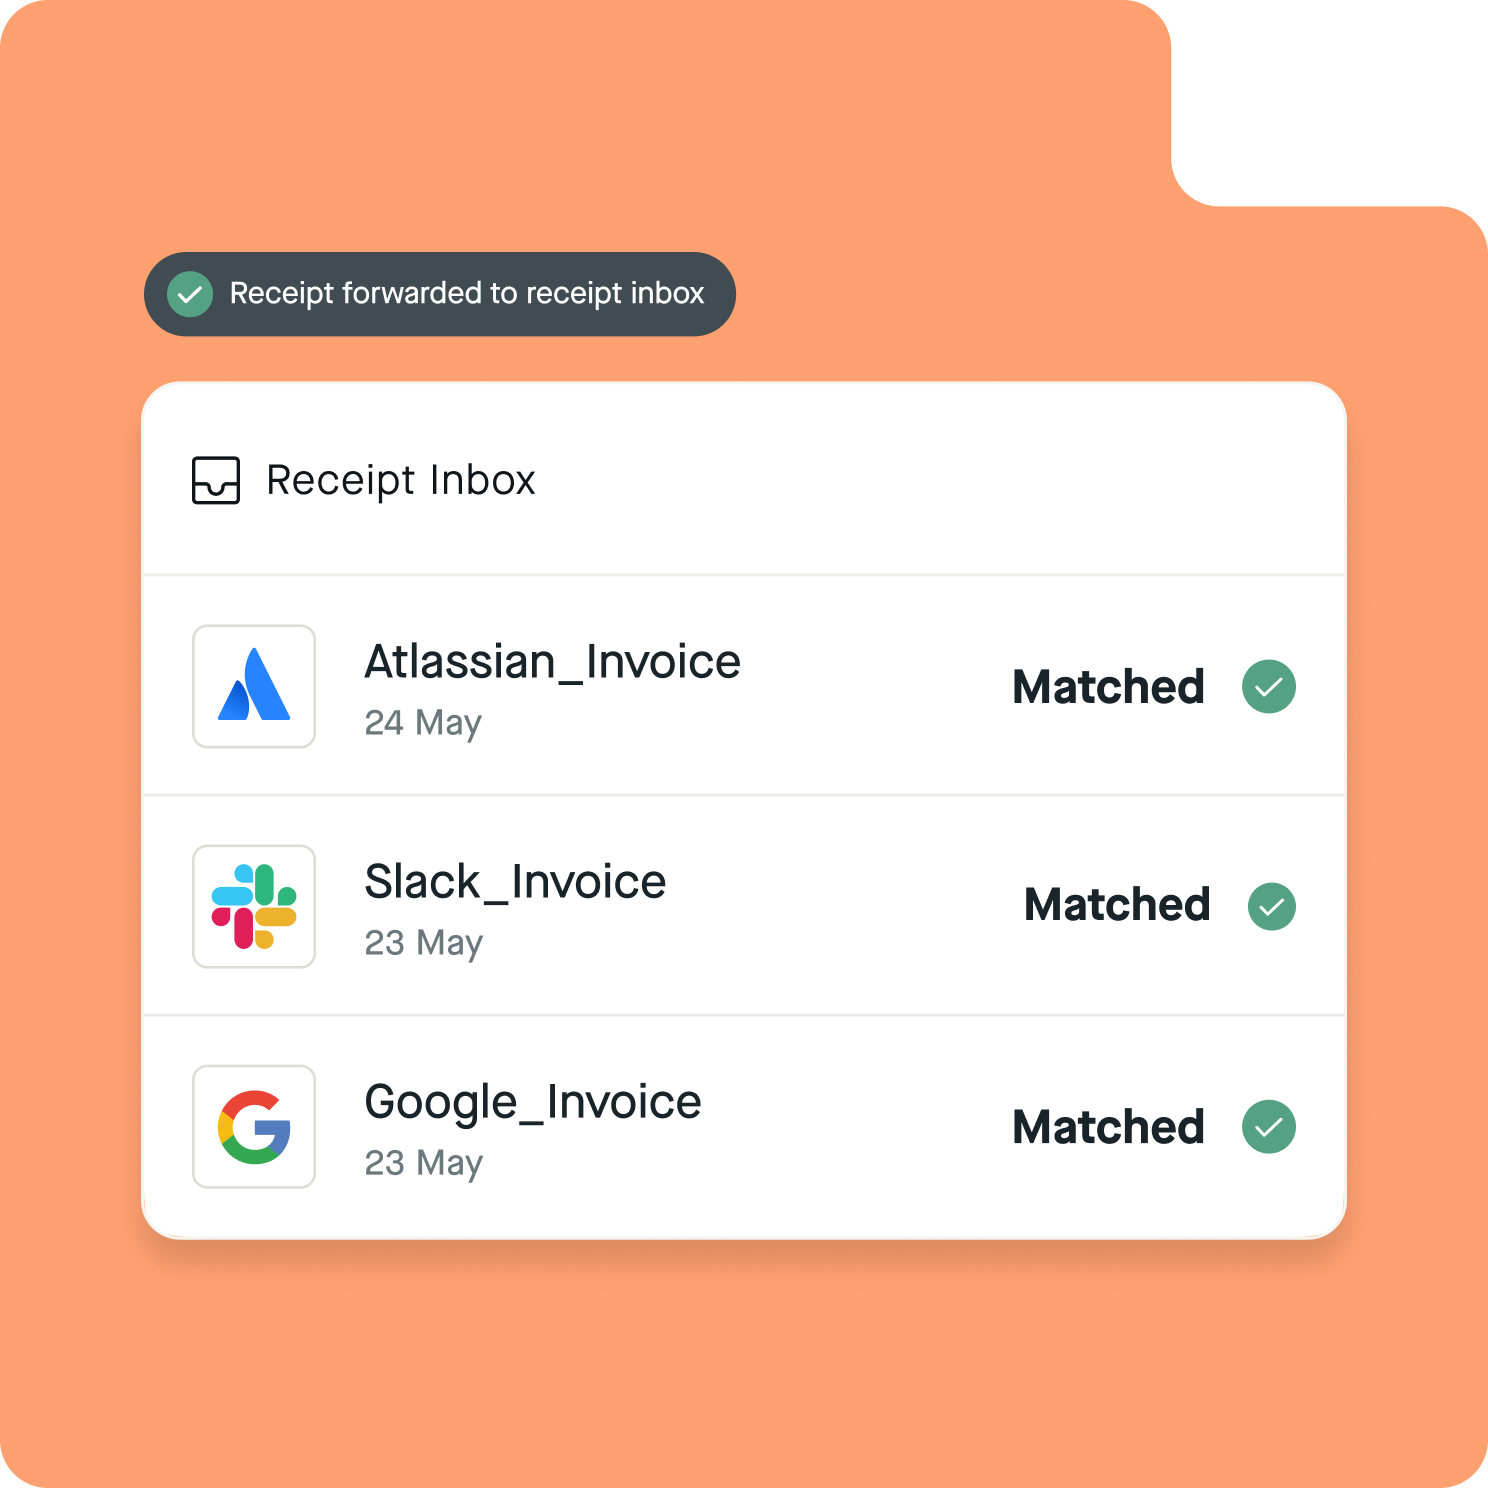 Pliant app matches transactions with receipts that are forwarded to receipt inbox